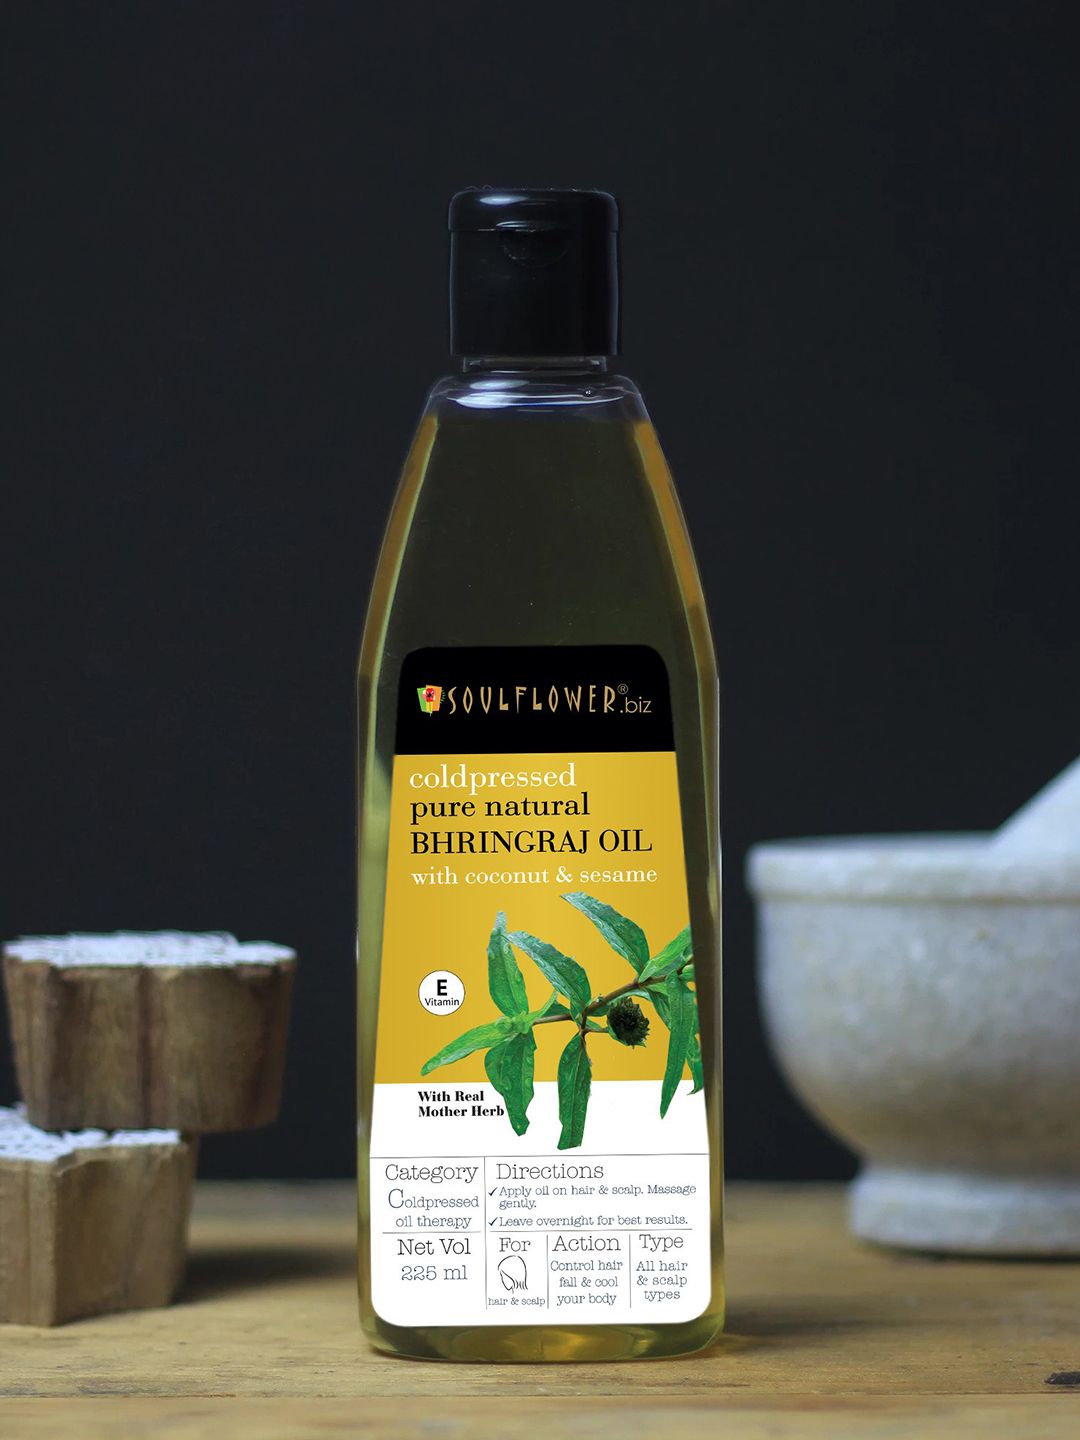 Soulflower Bhringraj Hair Oil with Coconut & Sesame - Hairfall Control Coldpressed 225 ml Price in India